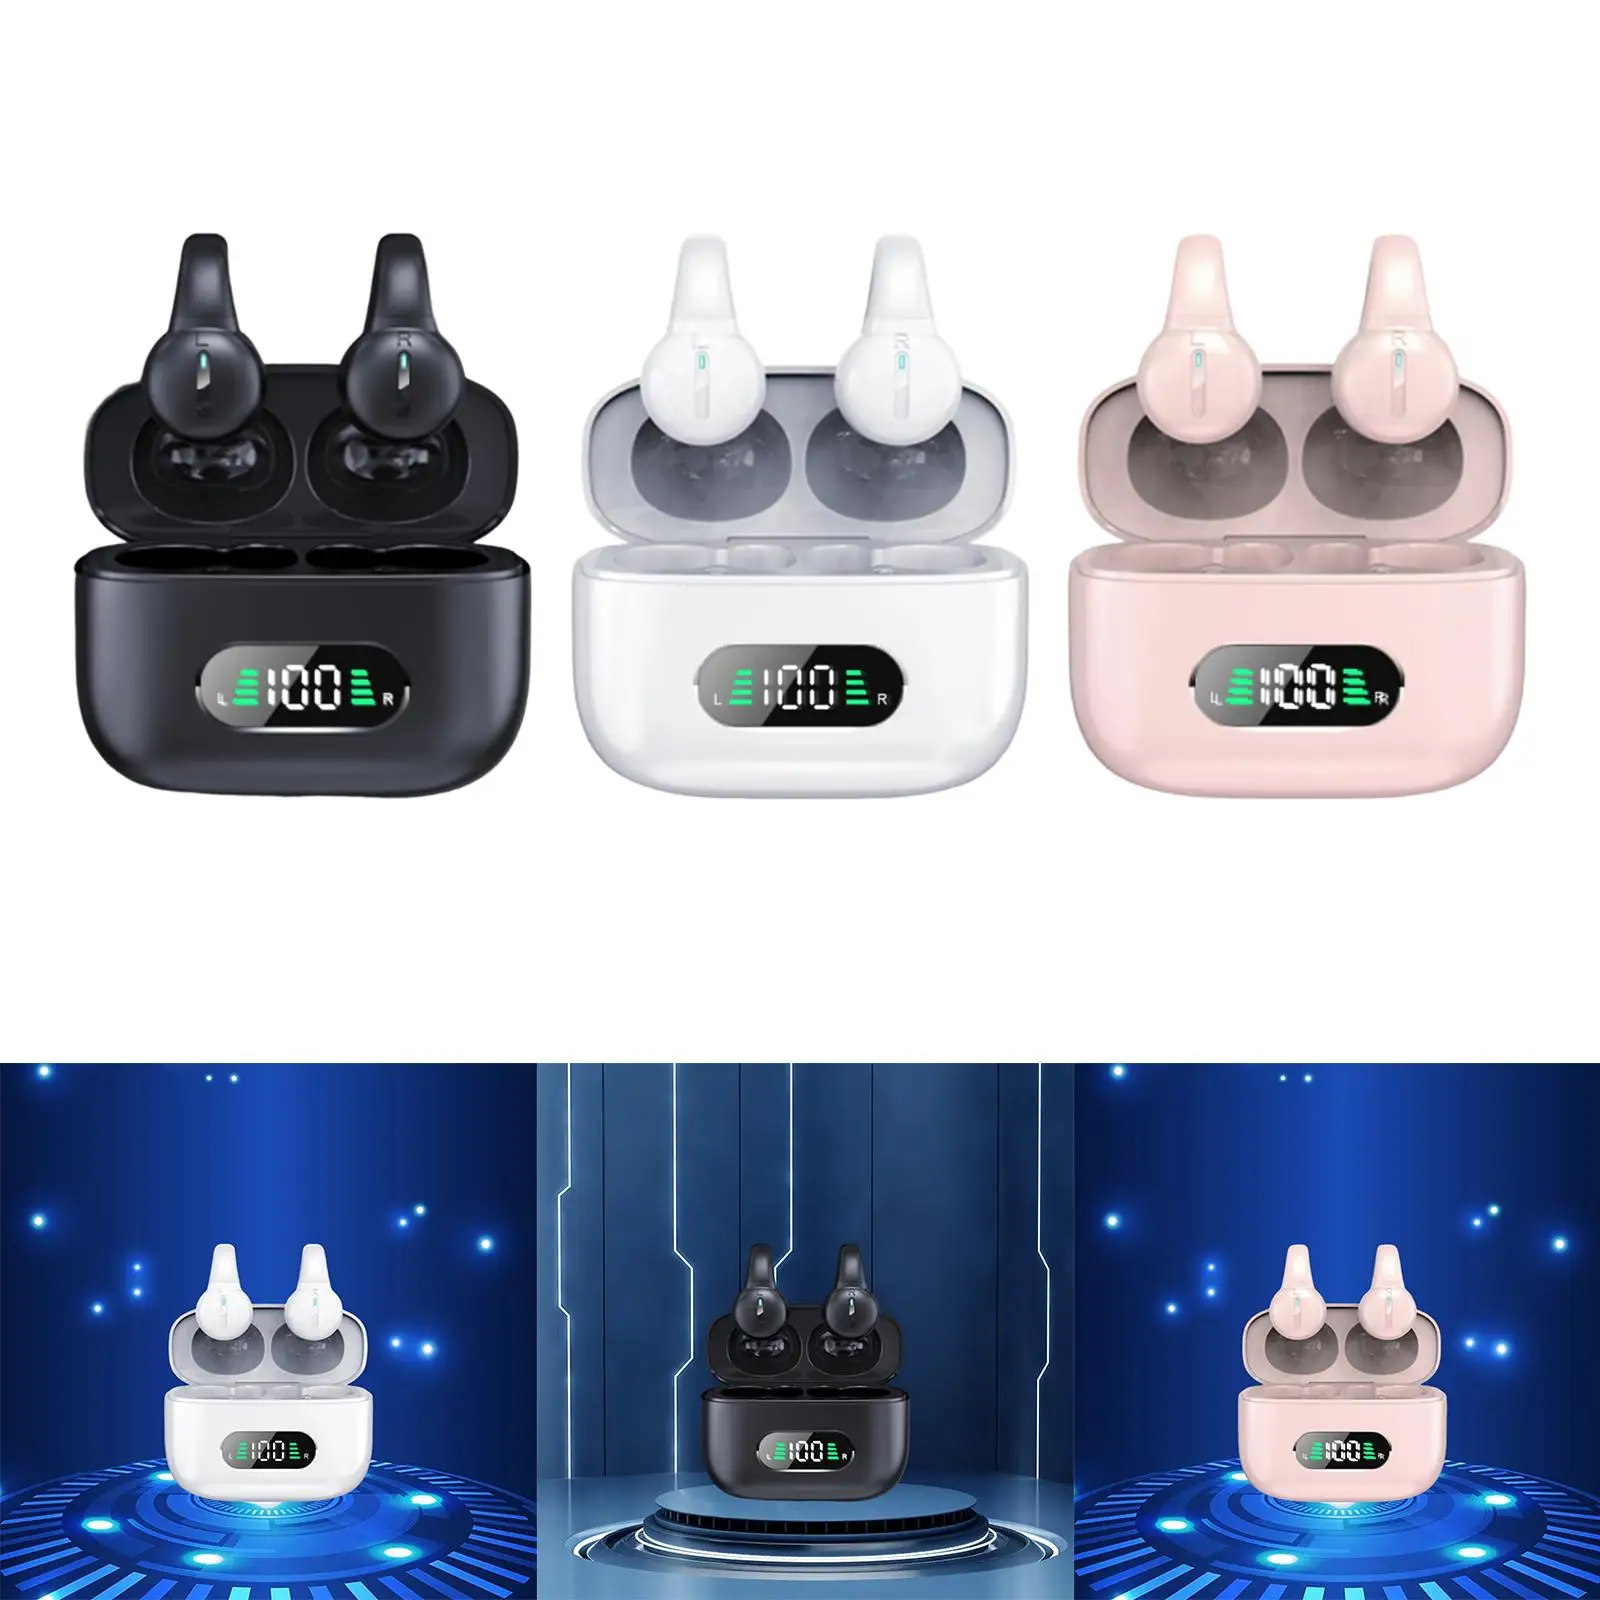 Ear Clip Headphone for Cycling Driving Waterproof Outer Headphones LED Display Sport Earbuds Headset with Case Open Ear Earbuds